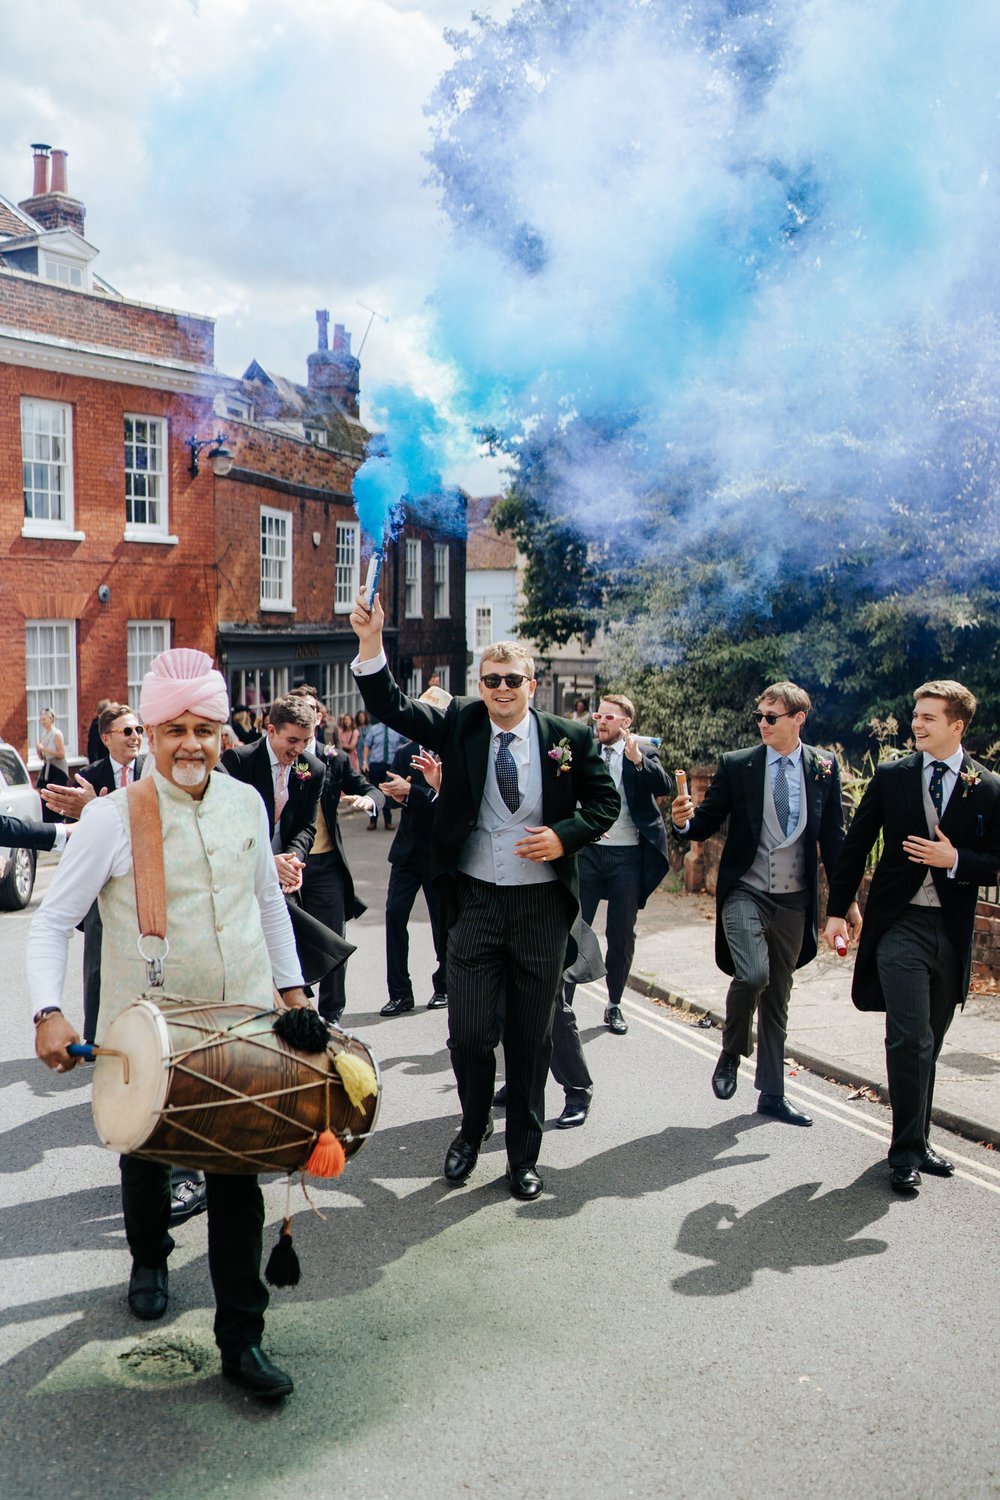 Baraat for the groom begins as groom's brother holds a blue smokebomb above his head while walking towards the crowd waiting at the top of the hill